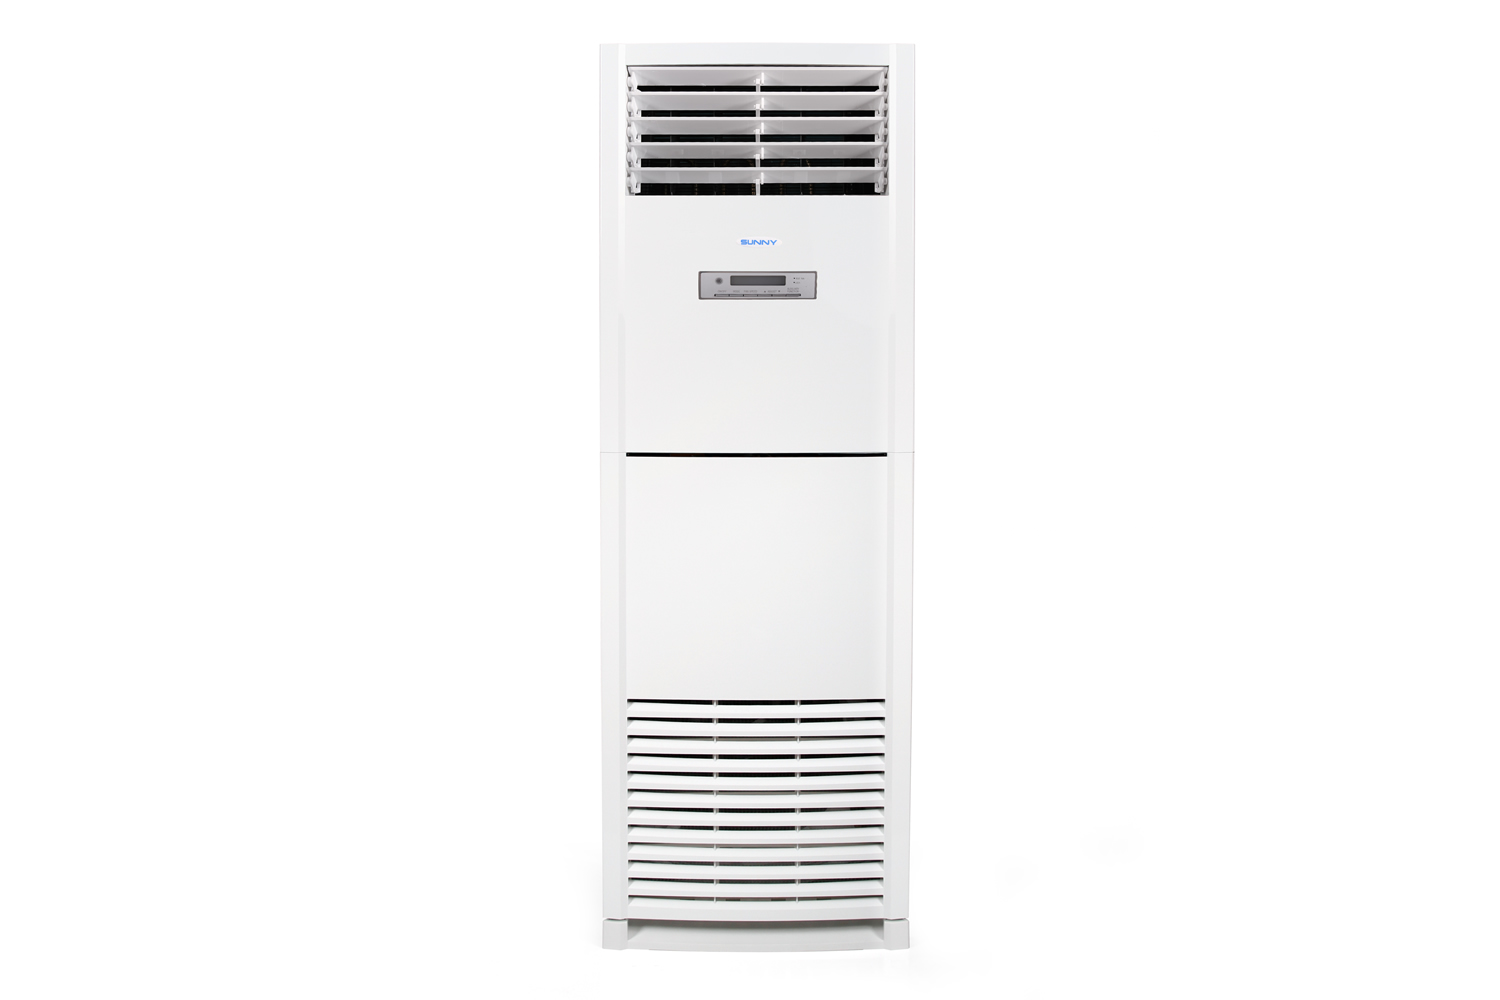 SNY480 HALL TYPE AIR CONDITIONER